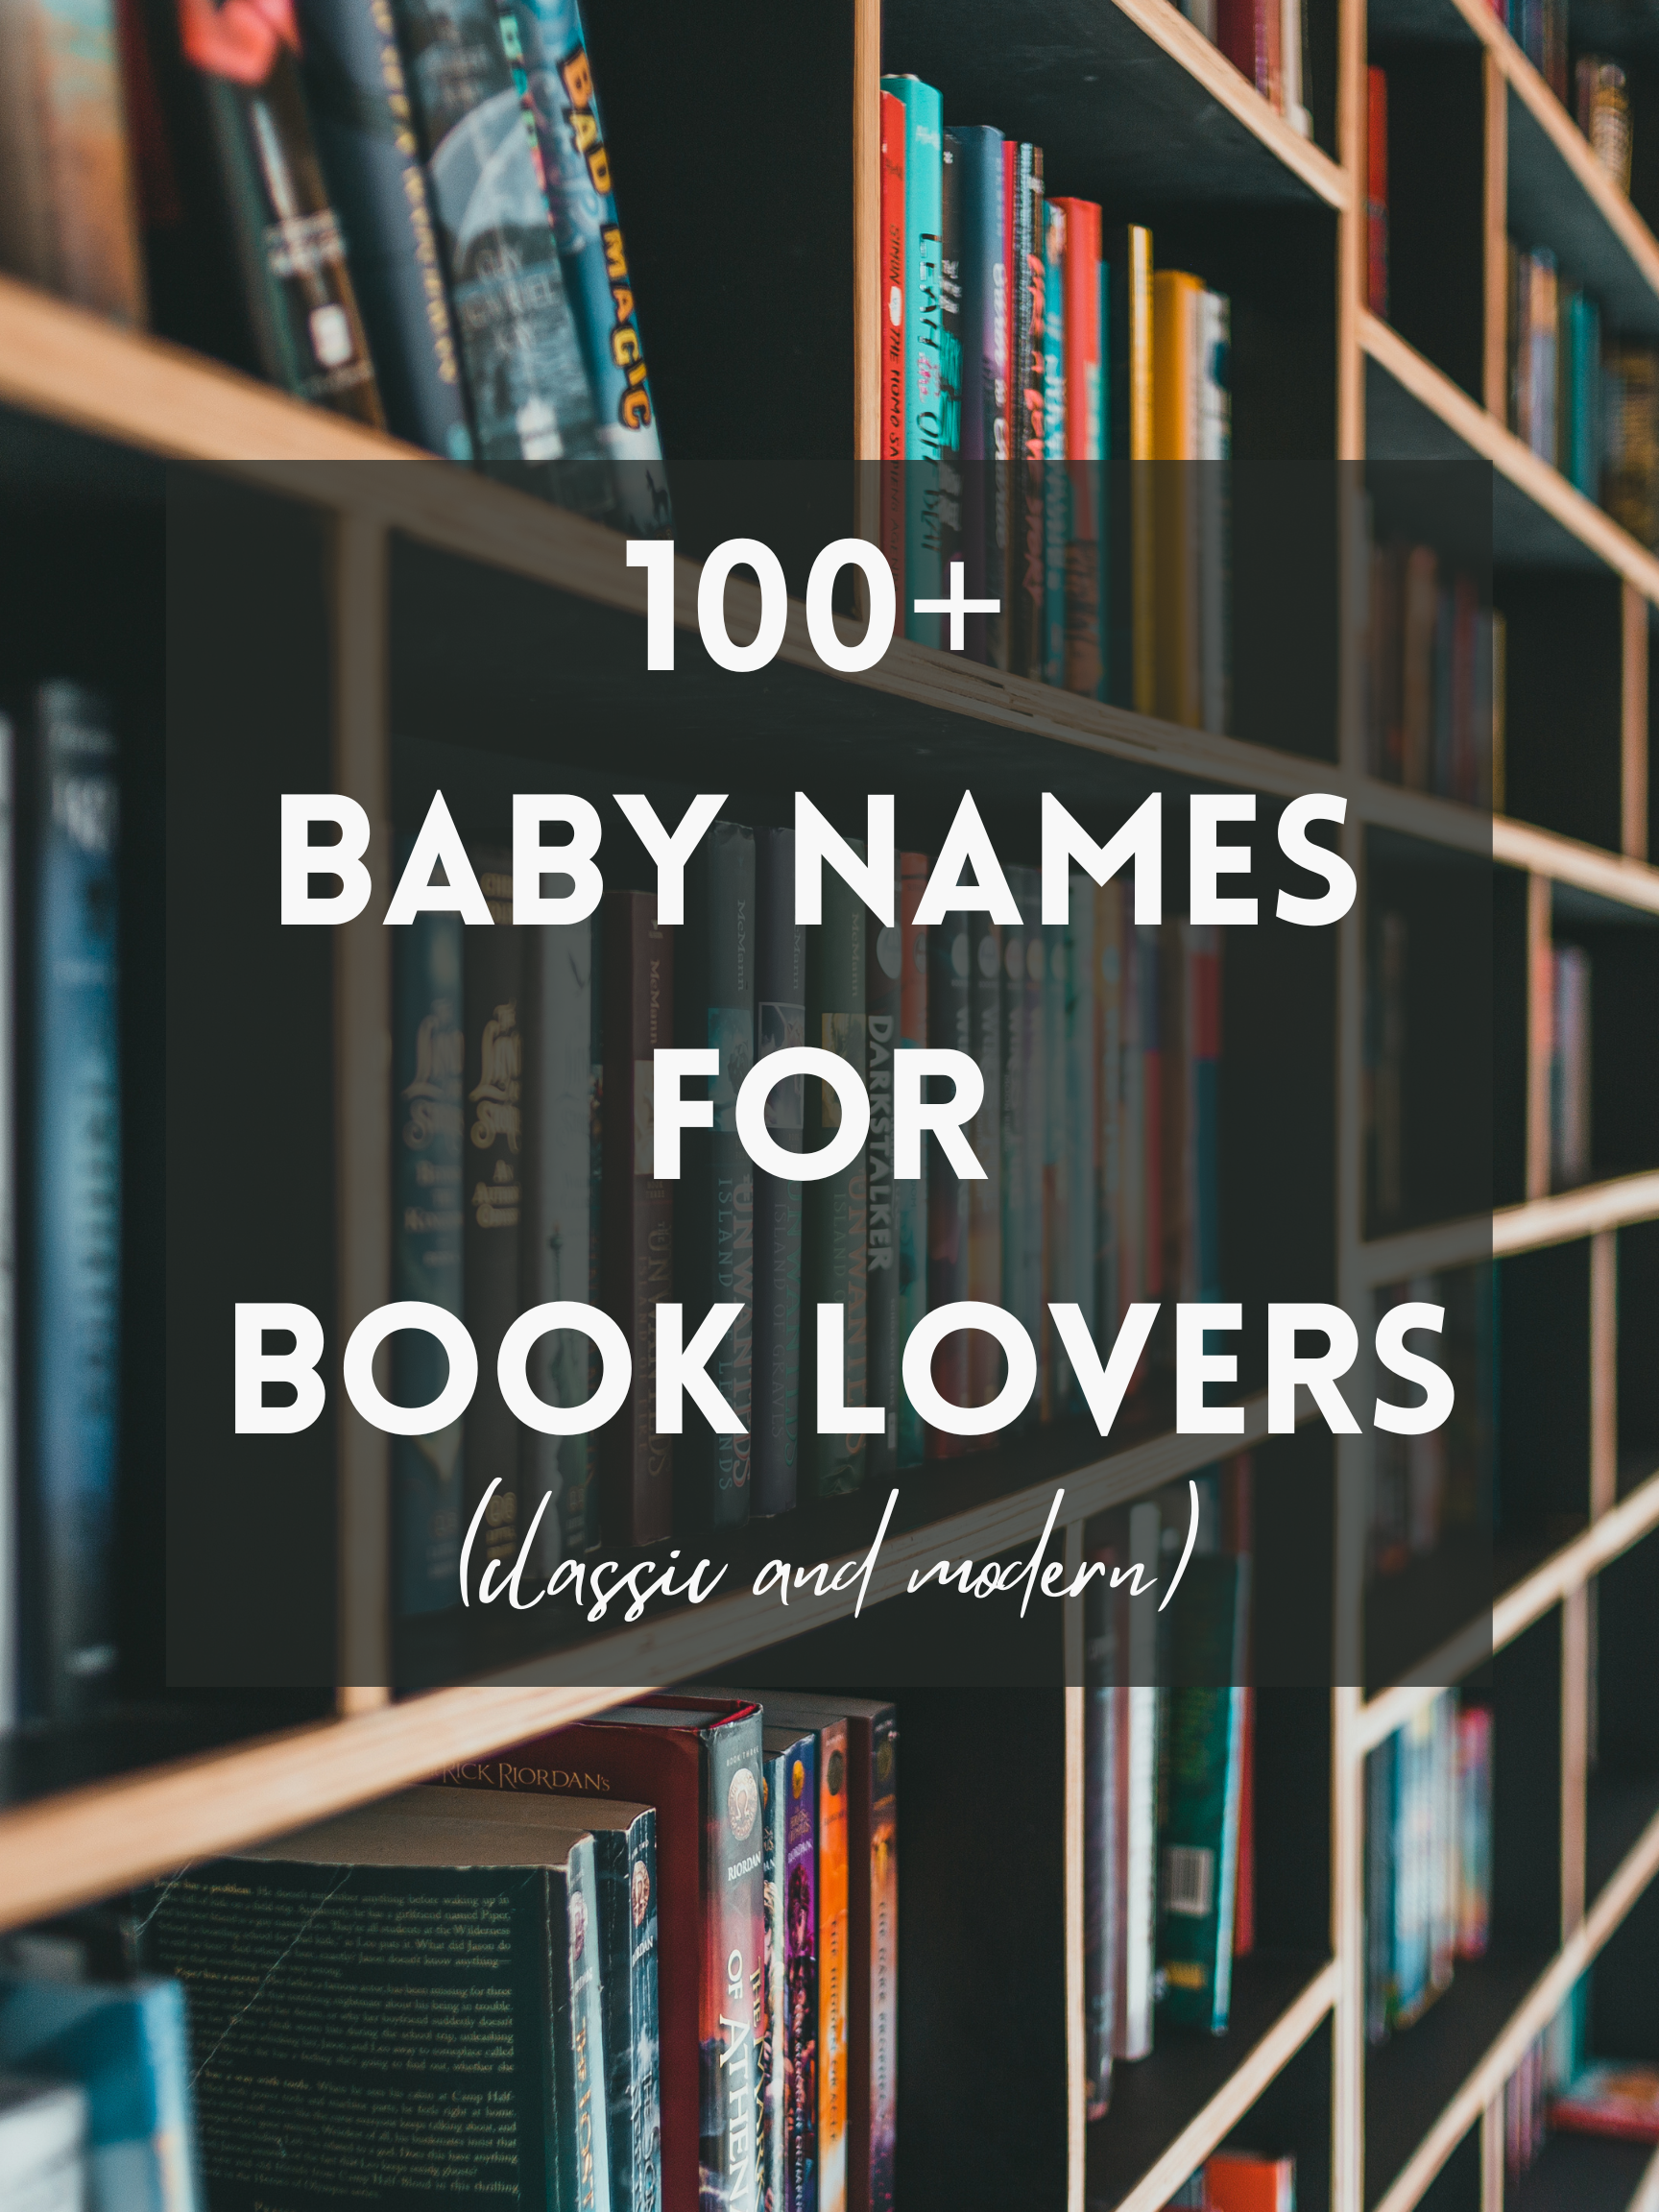 100+ Baby Names for Book Lovers